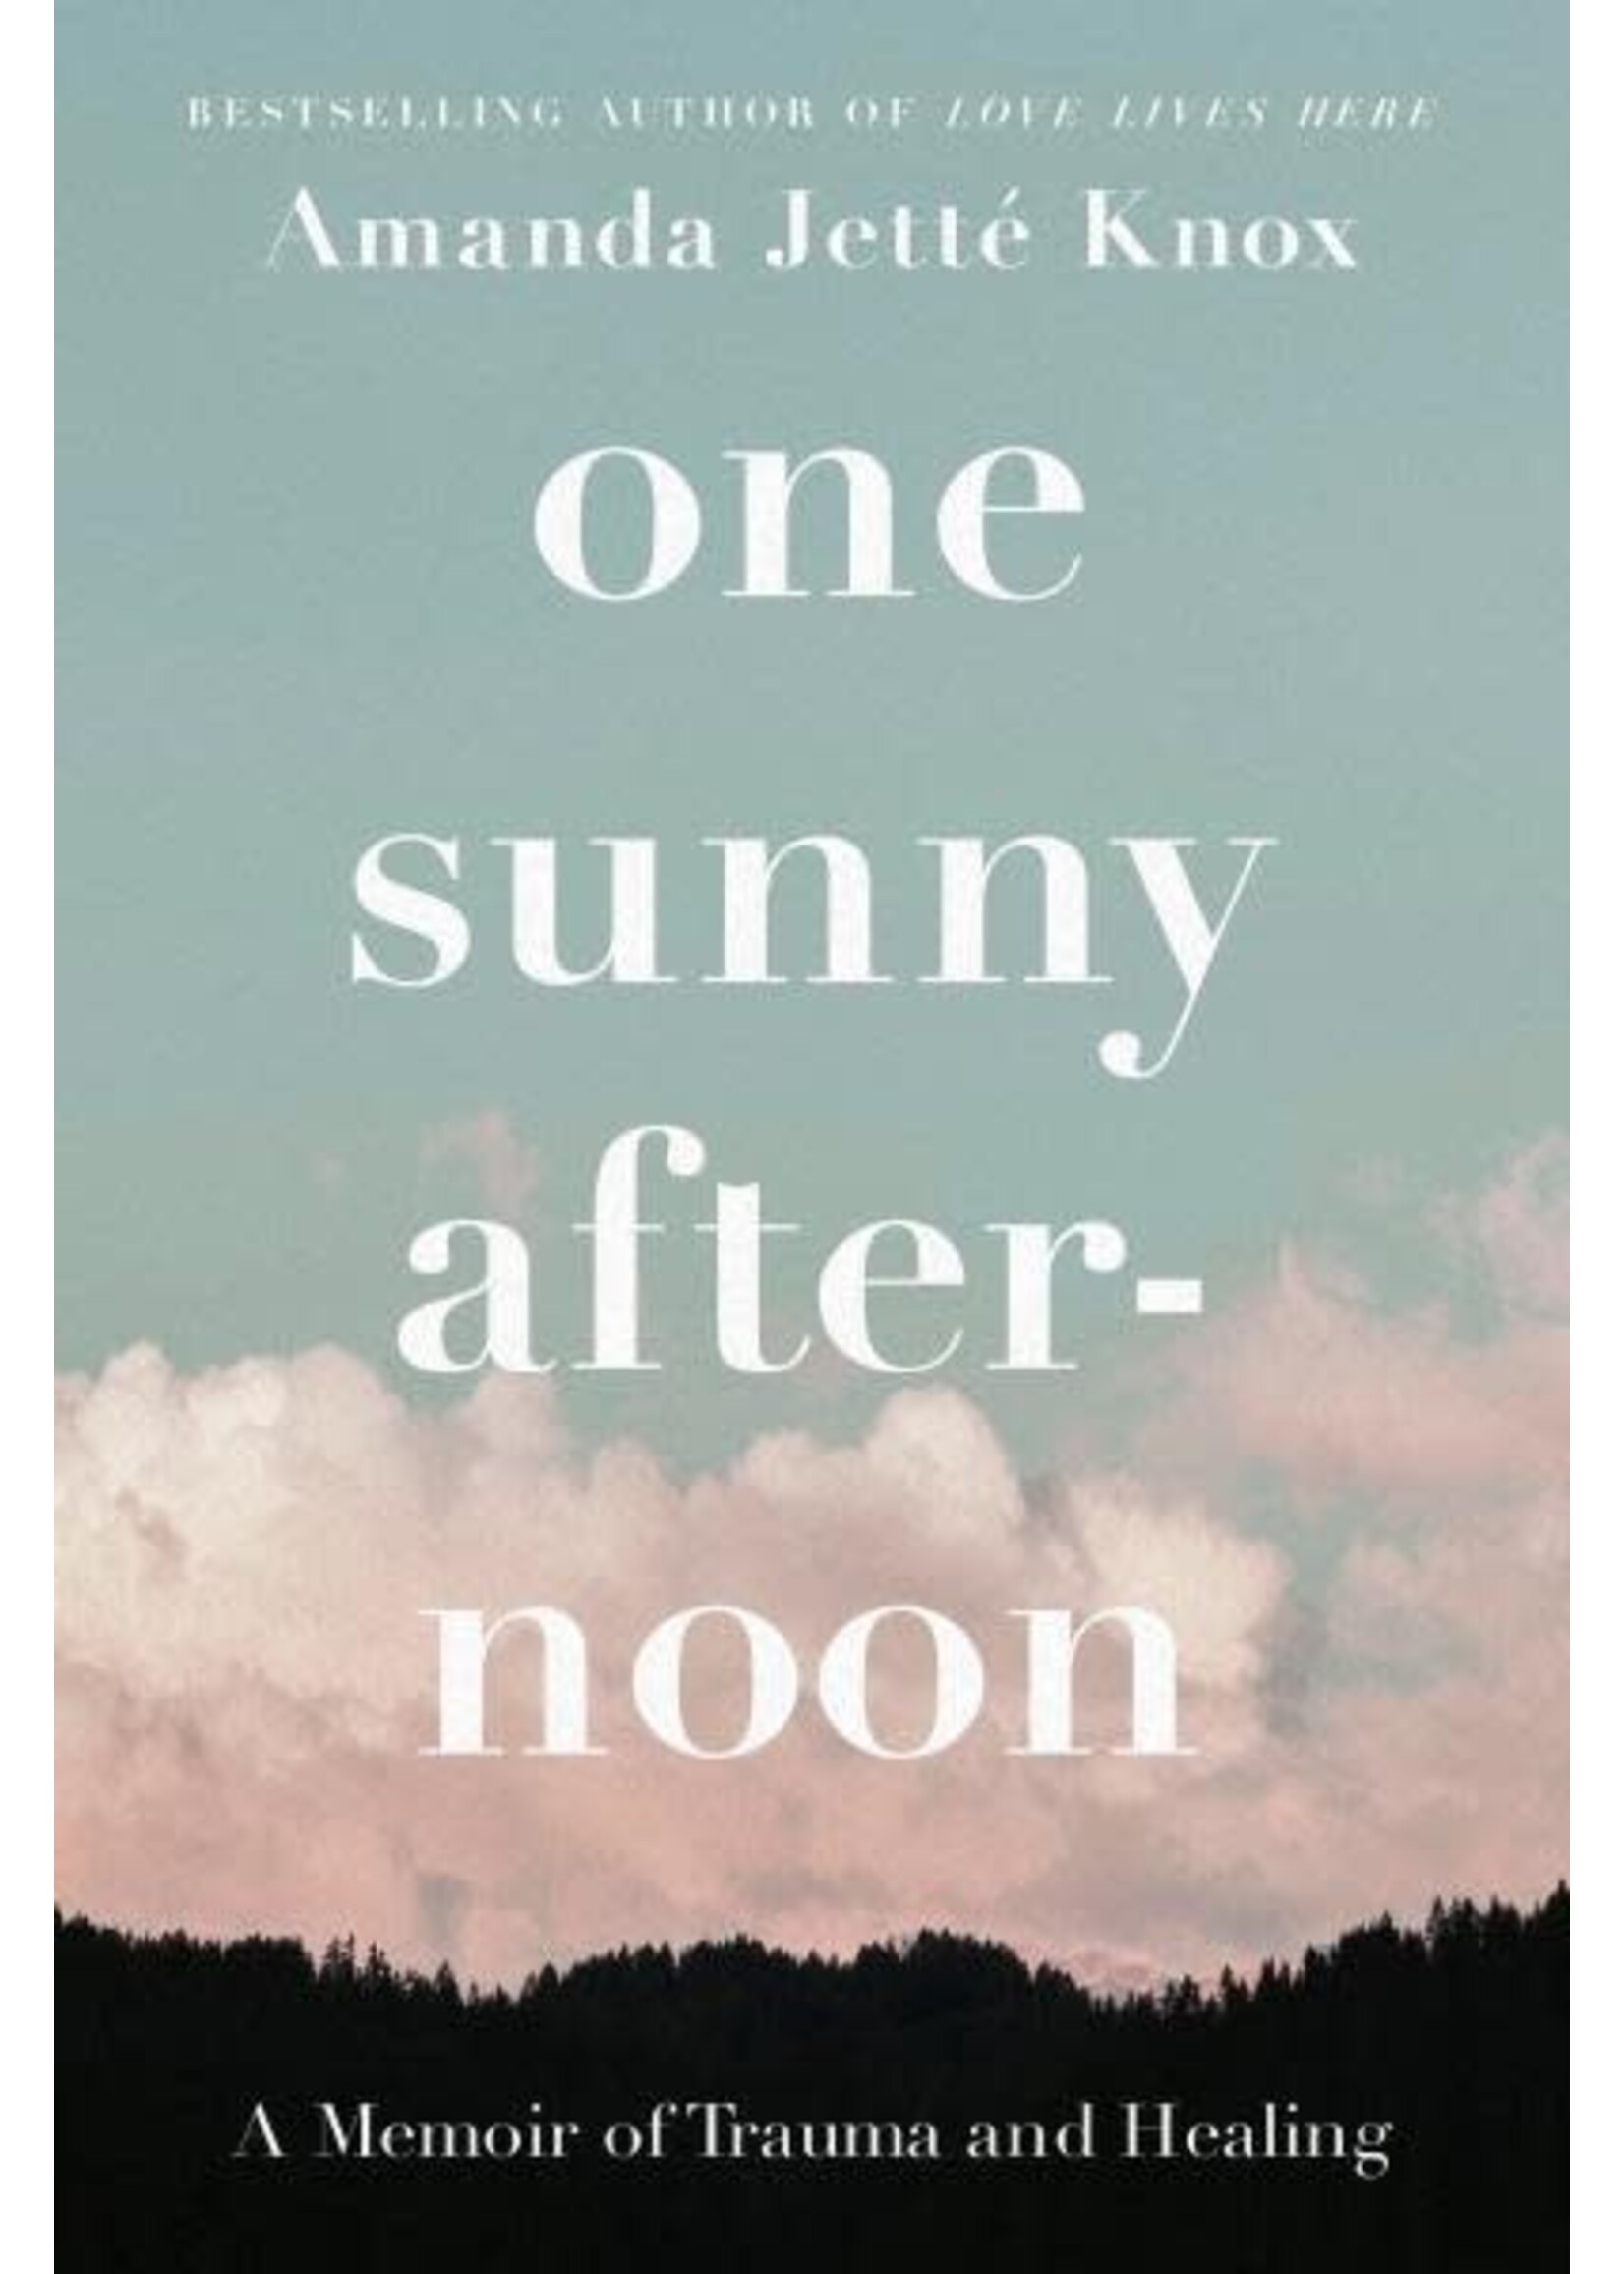 One Sunny Afternoon: A Memoir of Trauma and Healing by Rowan Jette Knox